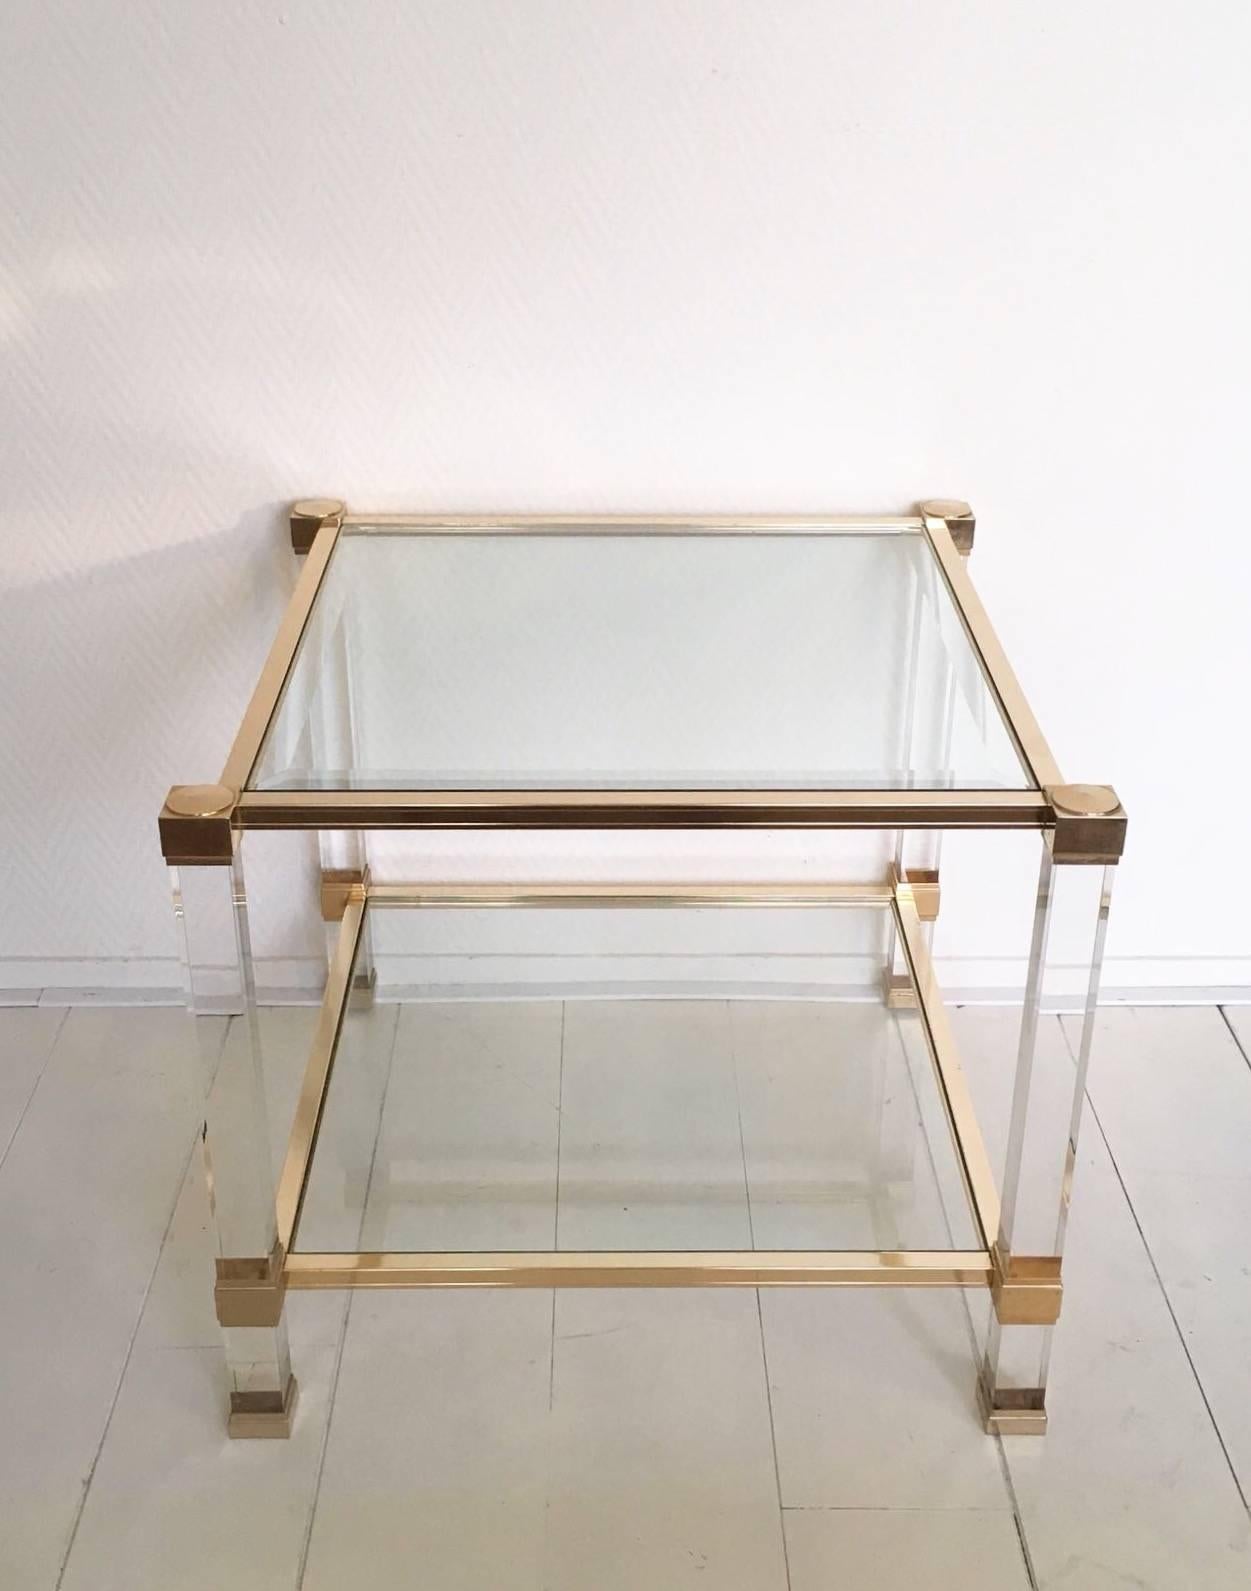 This two-tiered small coffee or side table was designed by Pierre Vandel Paris. It features a gold coloured metal base with beveled glass and partly Lucite feet. The table wear's the name of it's designer and remains in wonderful condition. Très